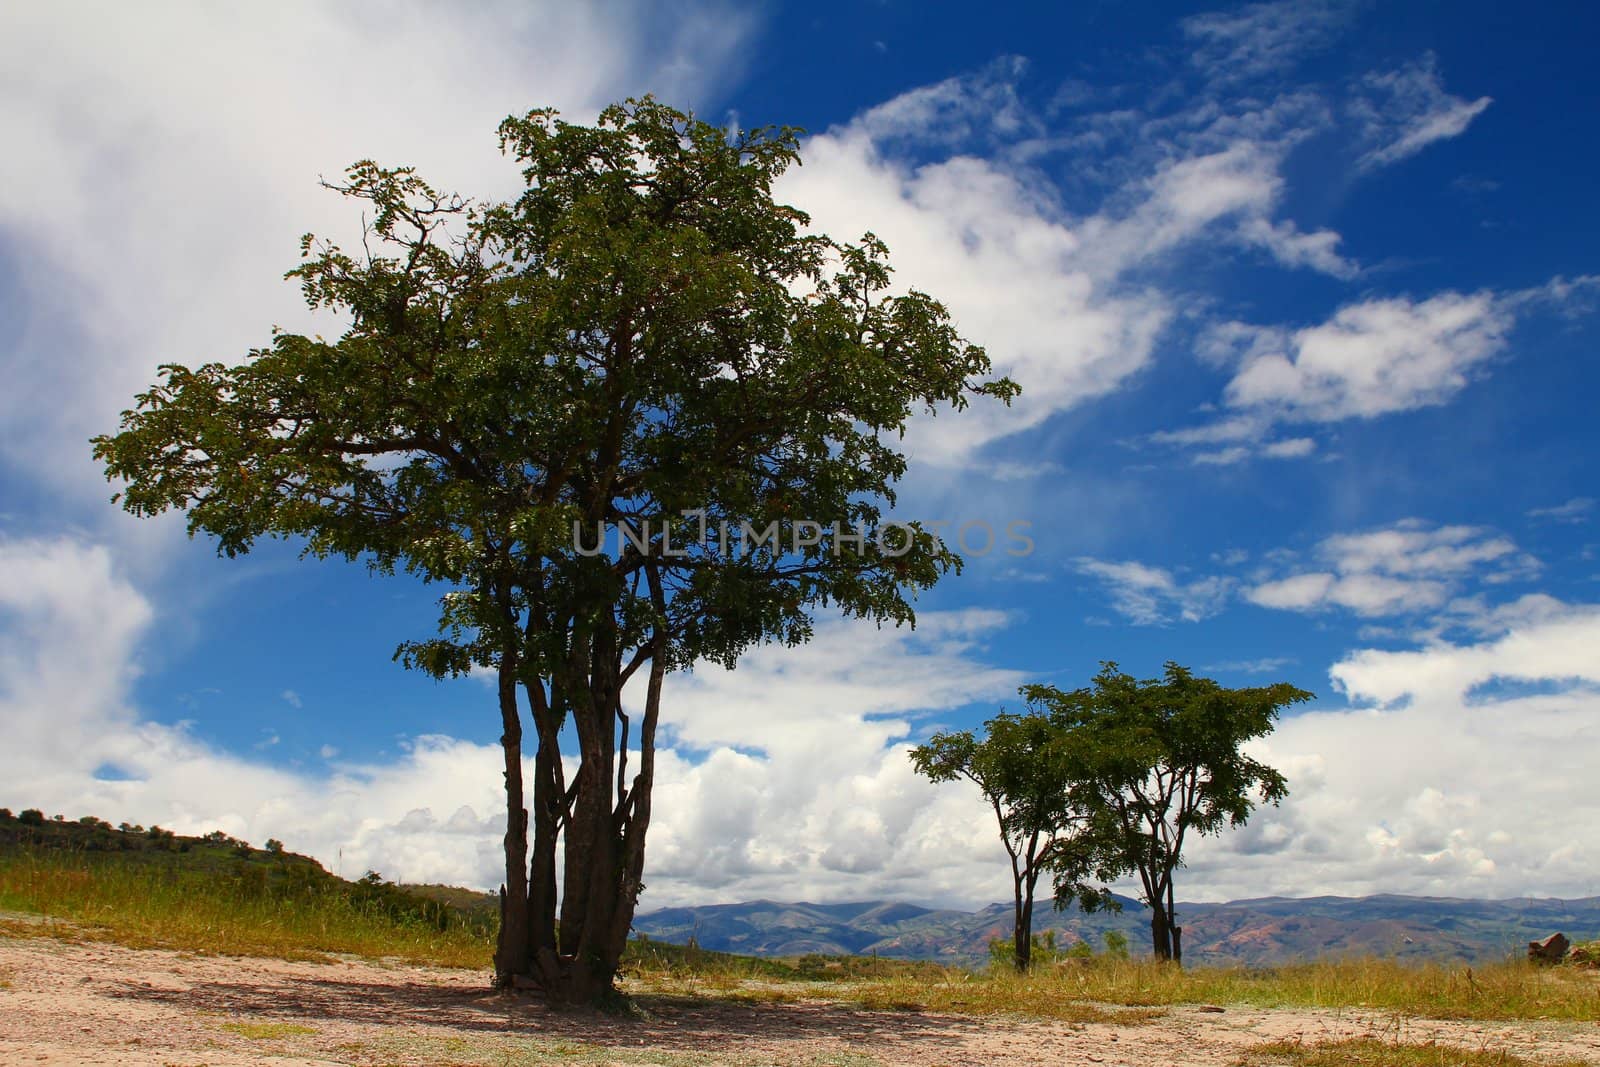 Solitary trees in dry environment
